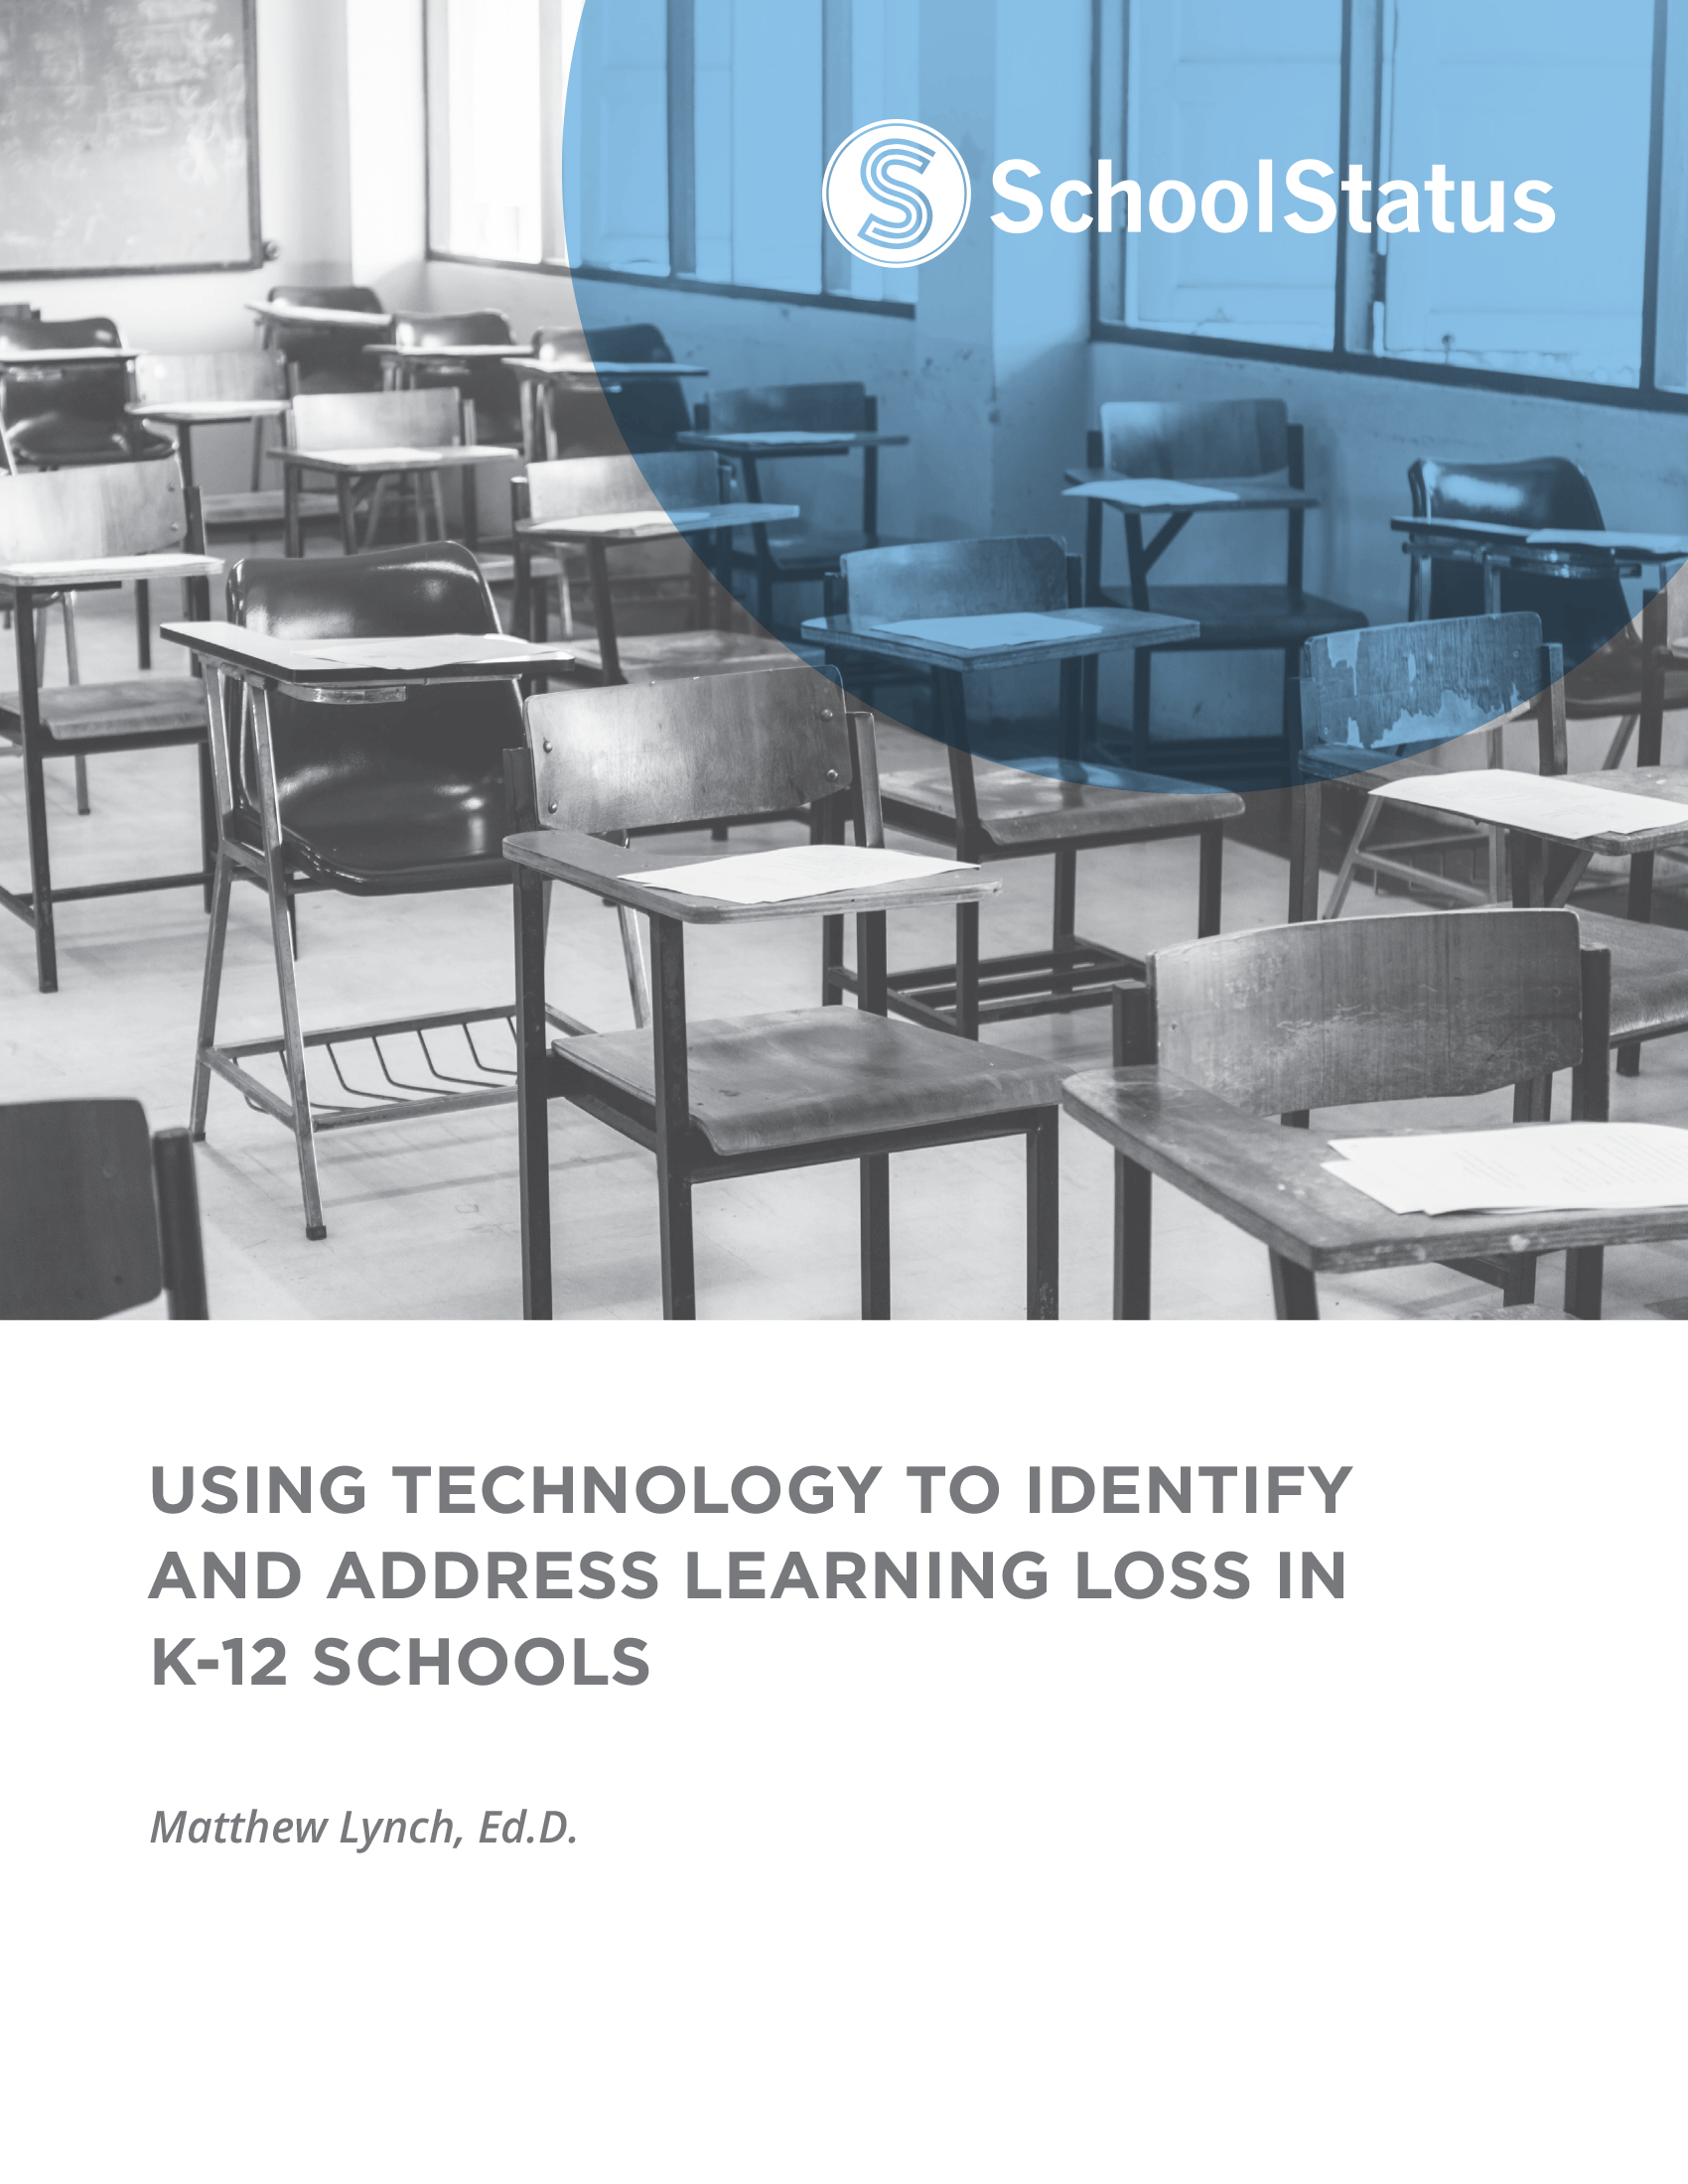 Using Technology to Identify and Address Learning Loss in Schools